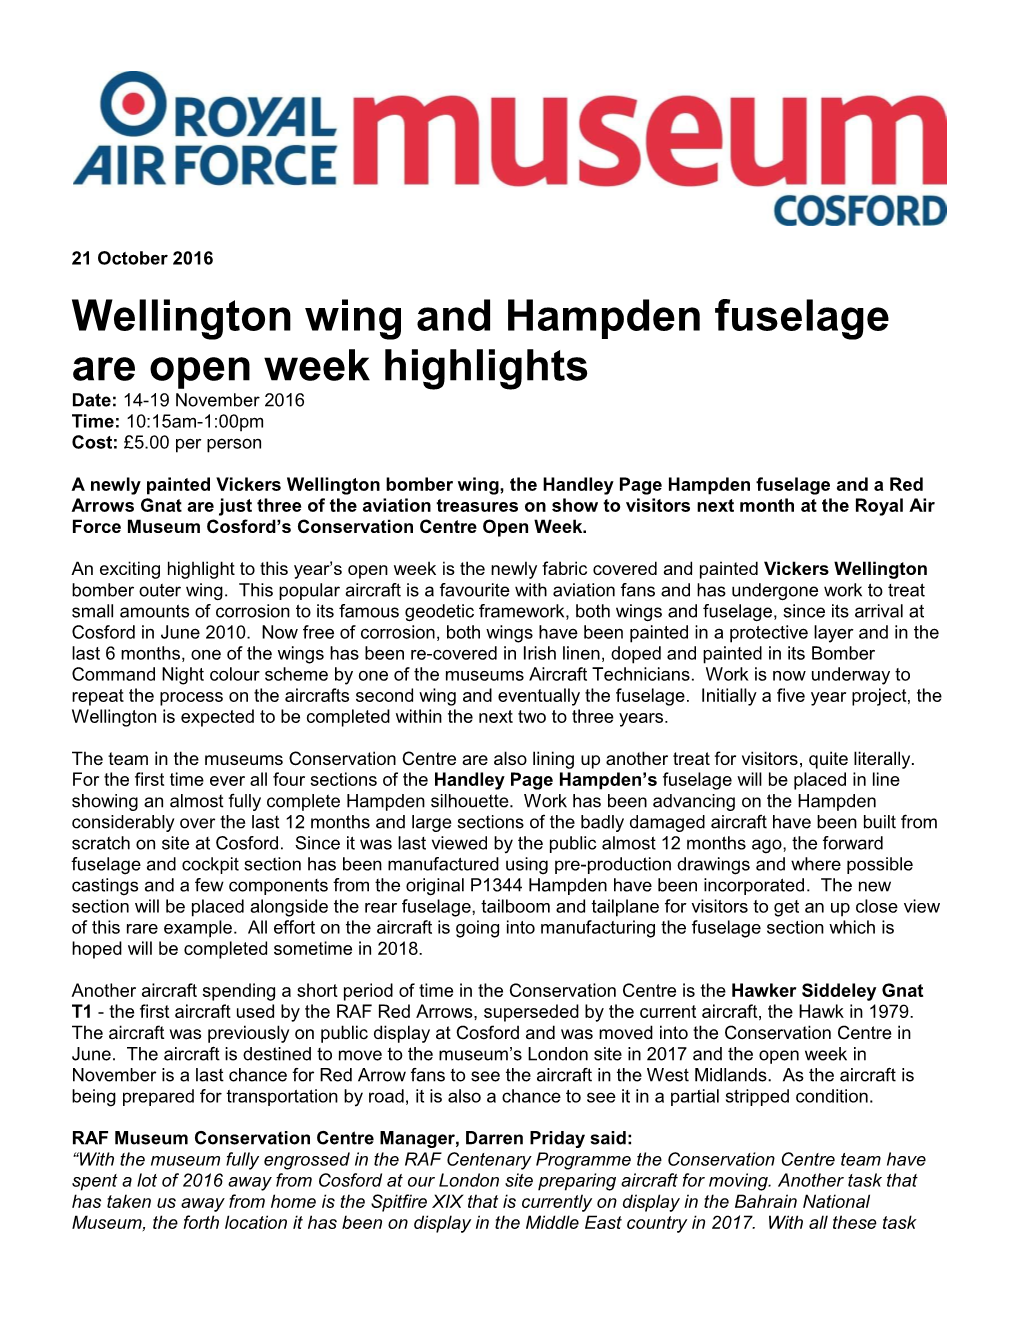 Wellington Wing and Hampden Fuselage Are Open Week Highlights Date: 14-19 November 2016 Time: 10:15Am-1:00Pm Cost: £5.00 Per Person